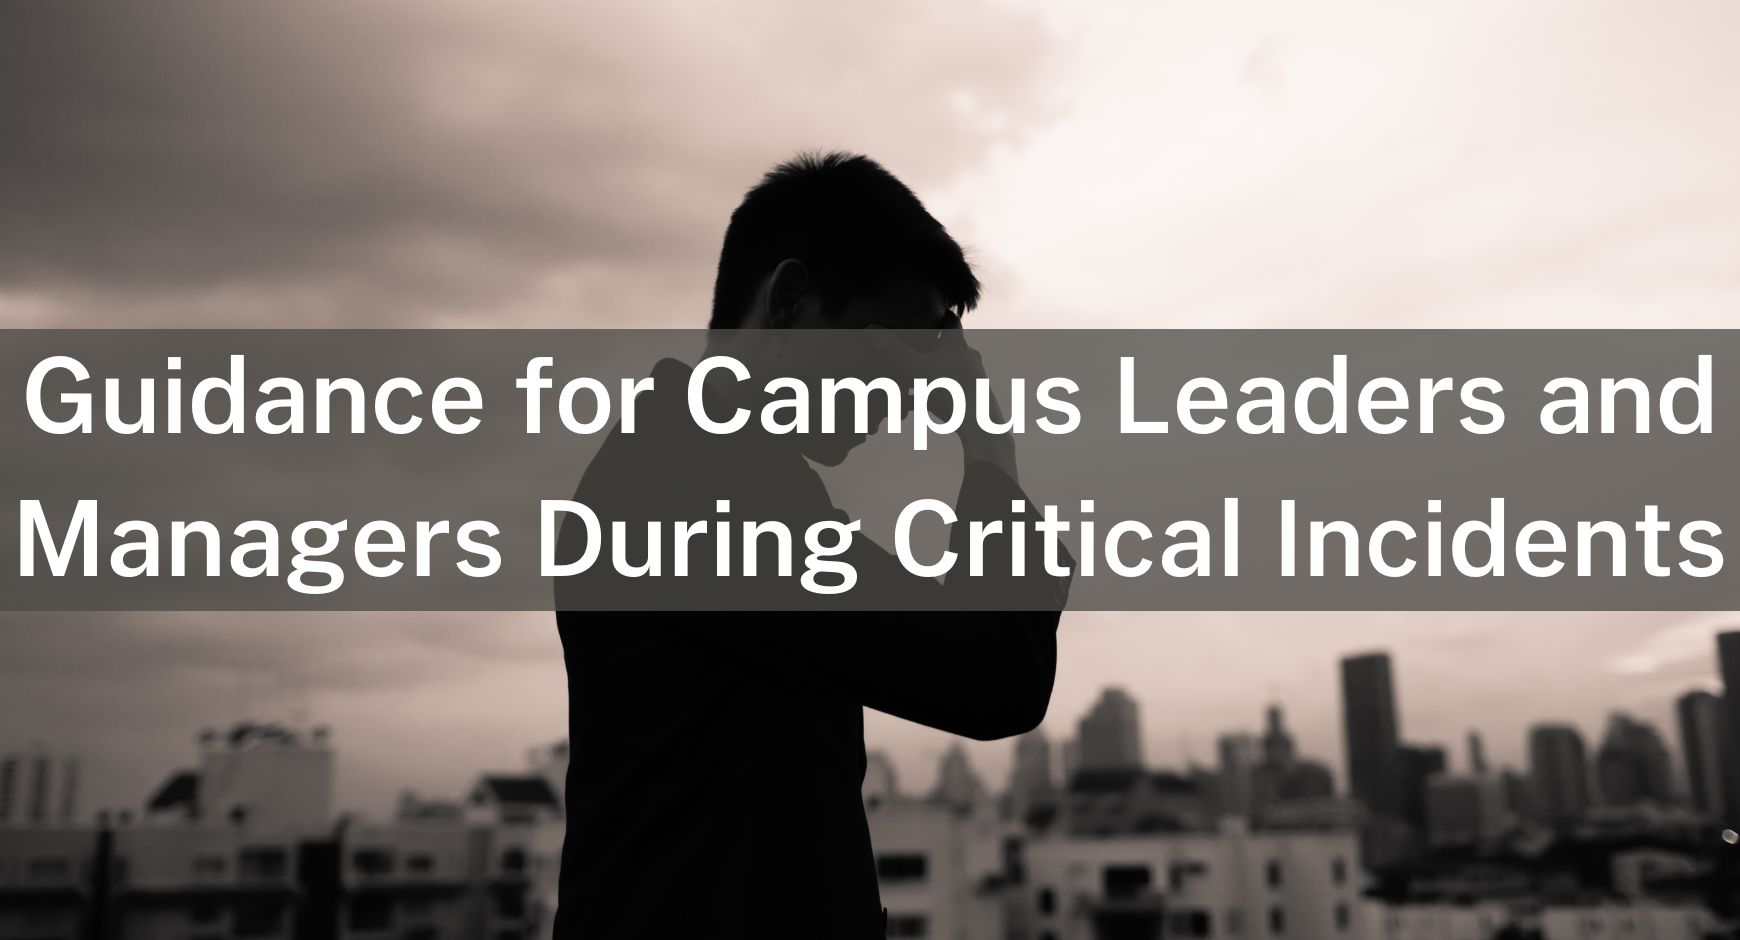 Guidance for Campus Leaders and Managers During Critical Incidents